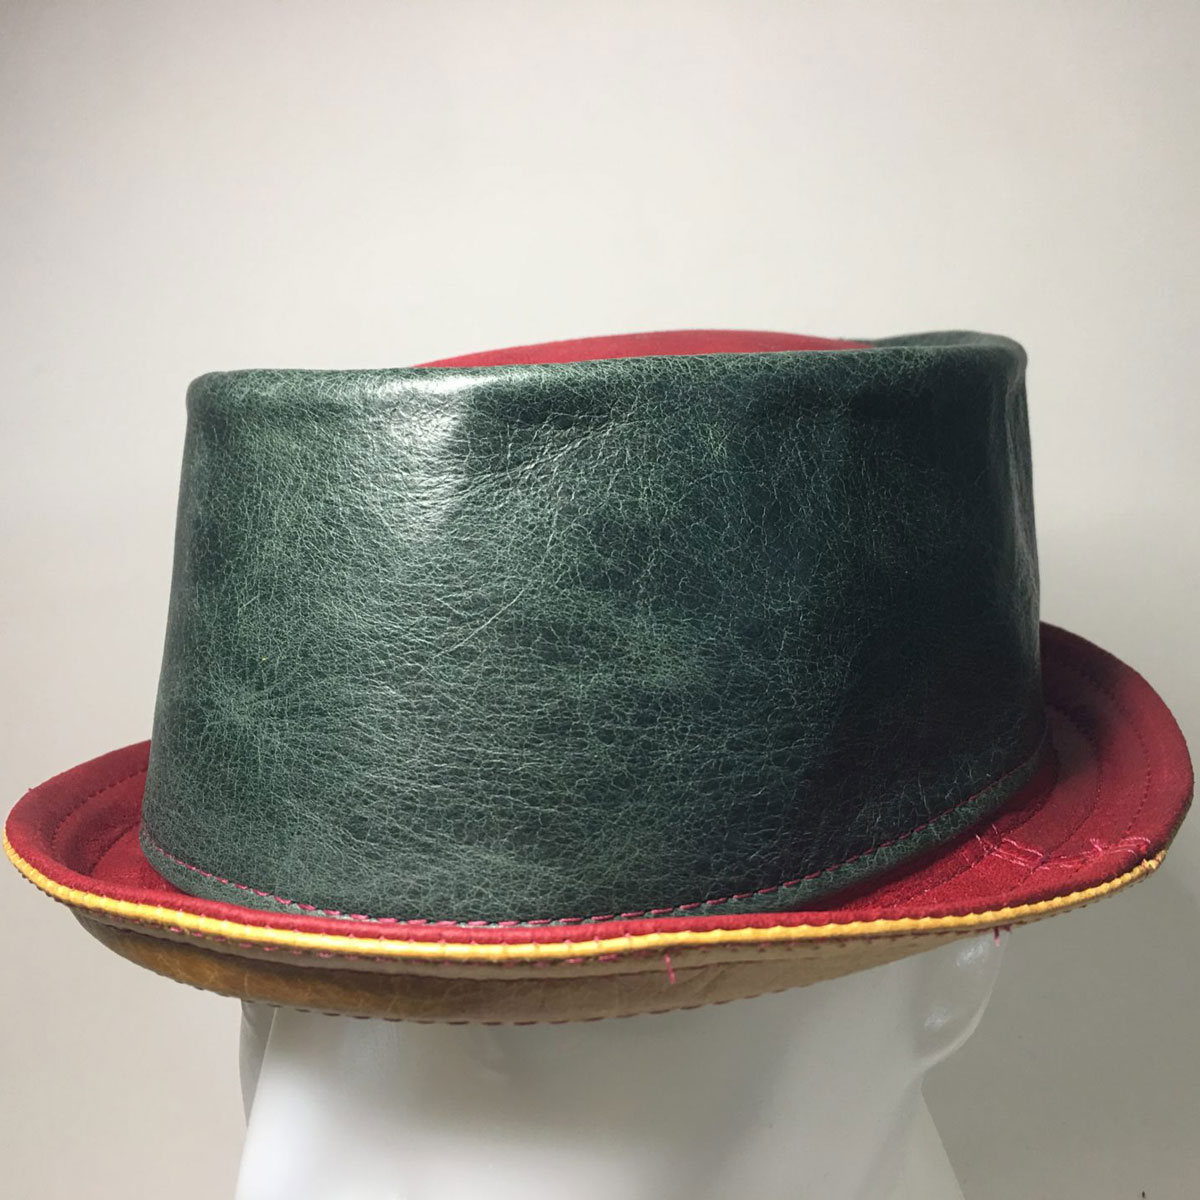 Made To Order 3 Colour-Way Pork Pie Hat